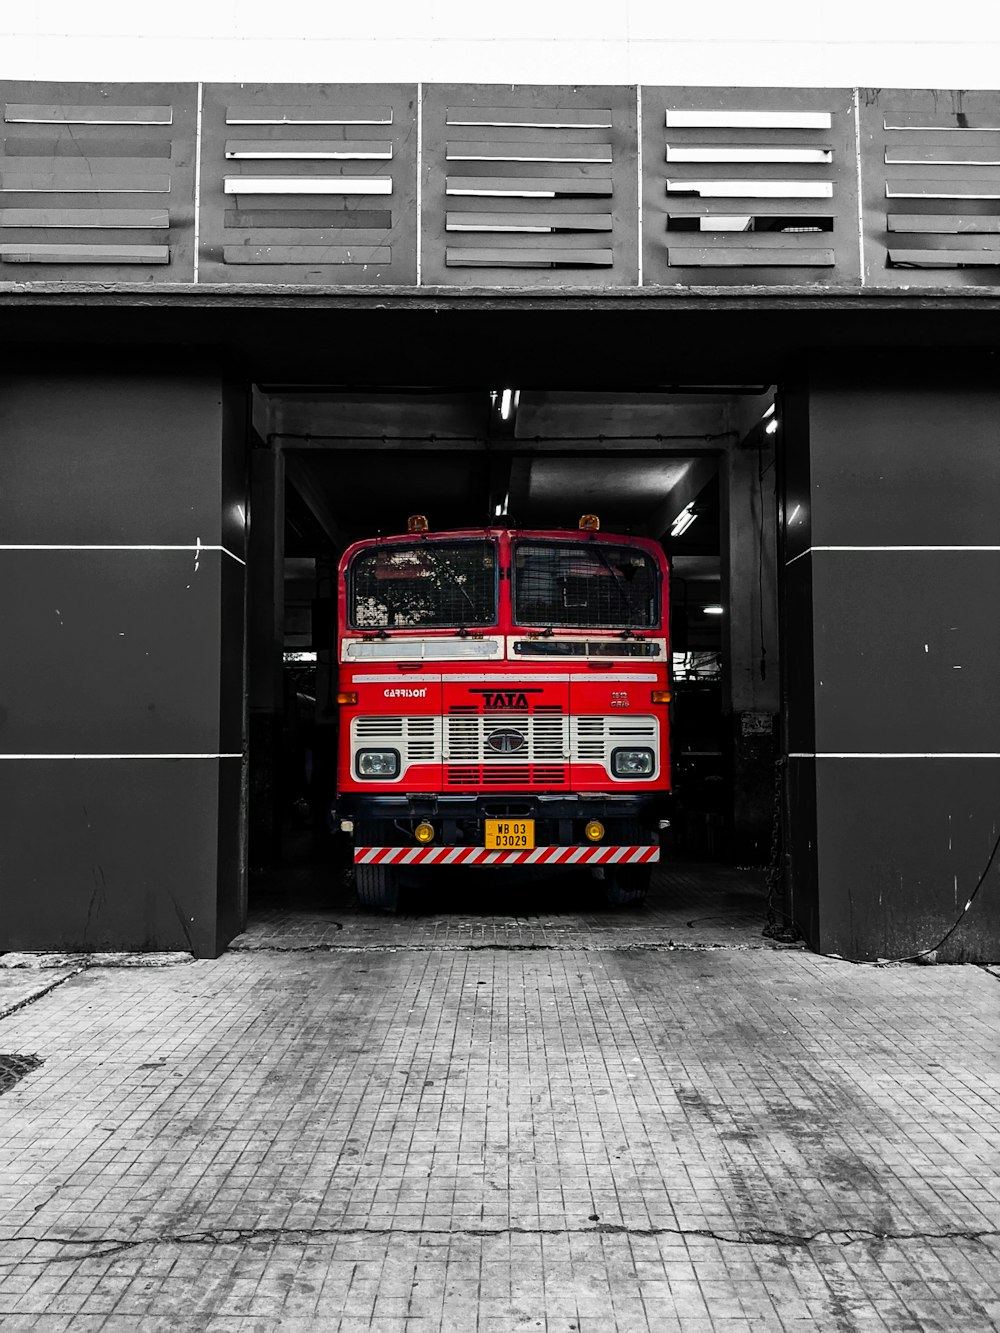 red blue and yellow bus in a tunnel